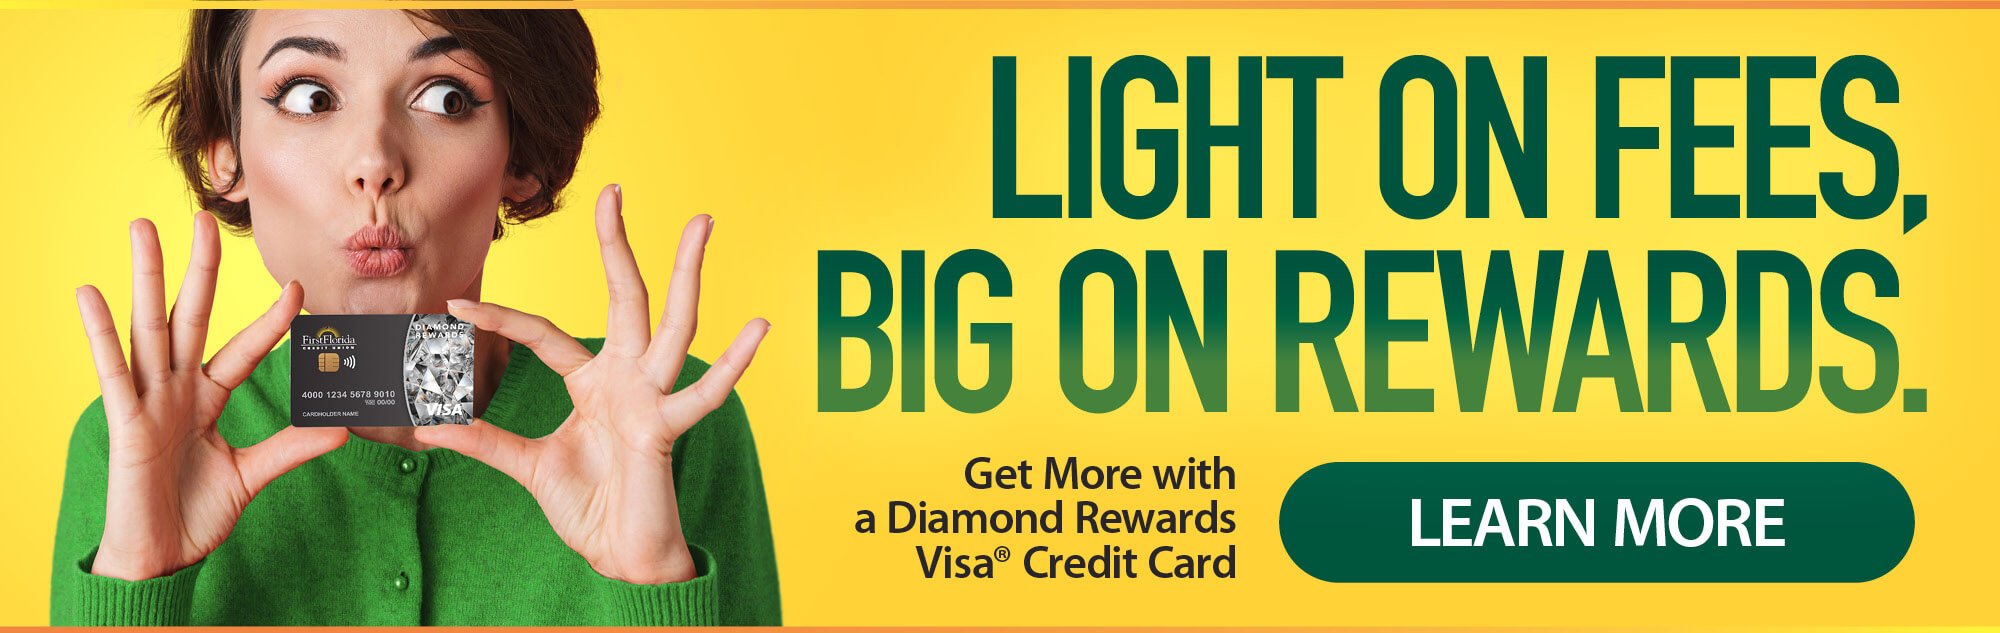 Light on fees, big on rewards. Get more with a Diamond Rewards Visa Credit Card. Learn More.